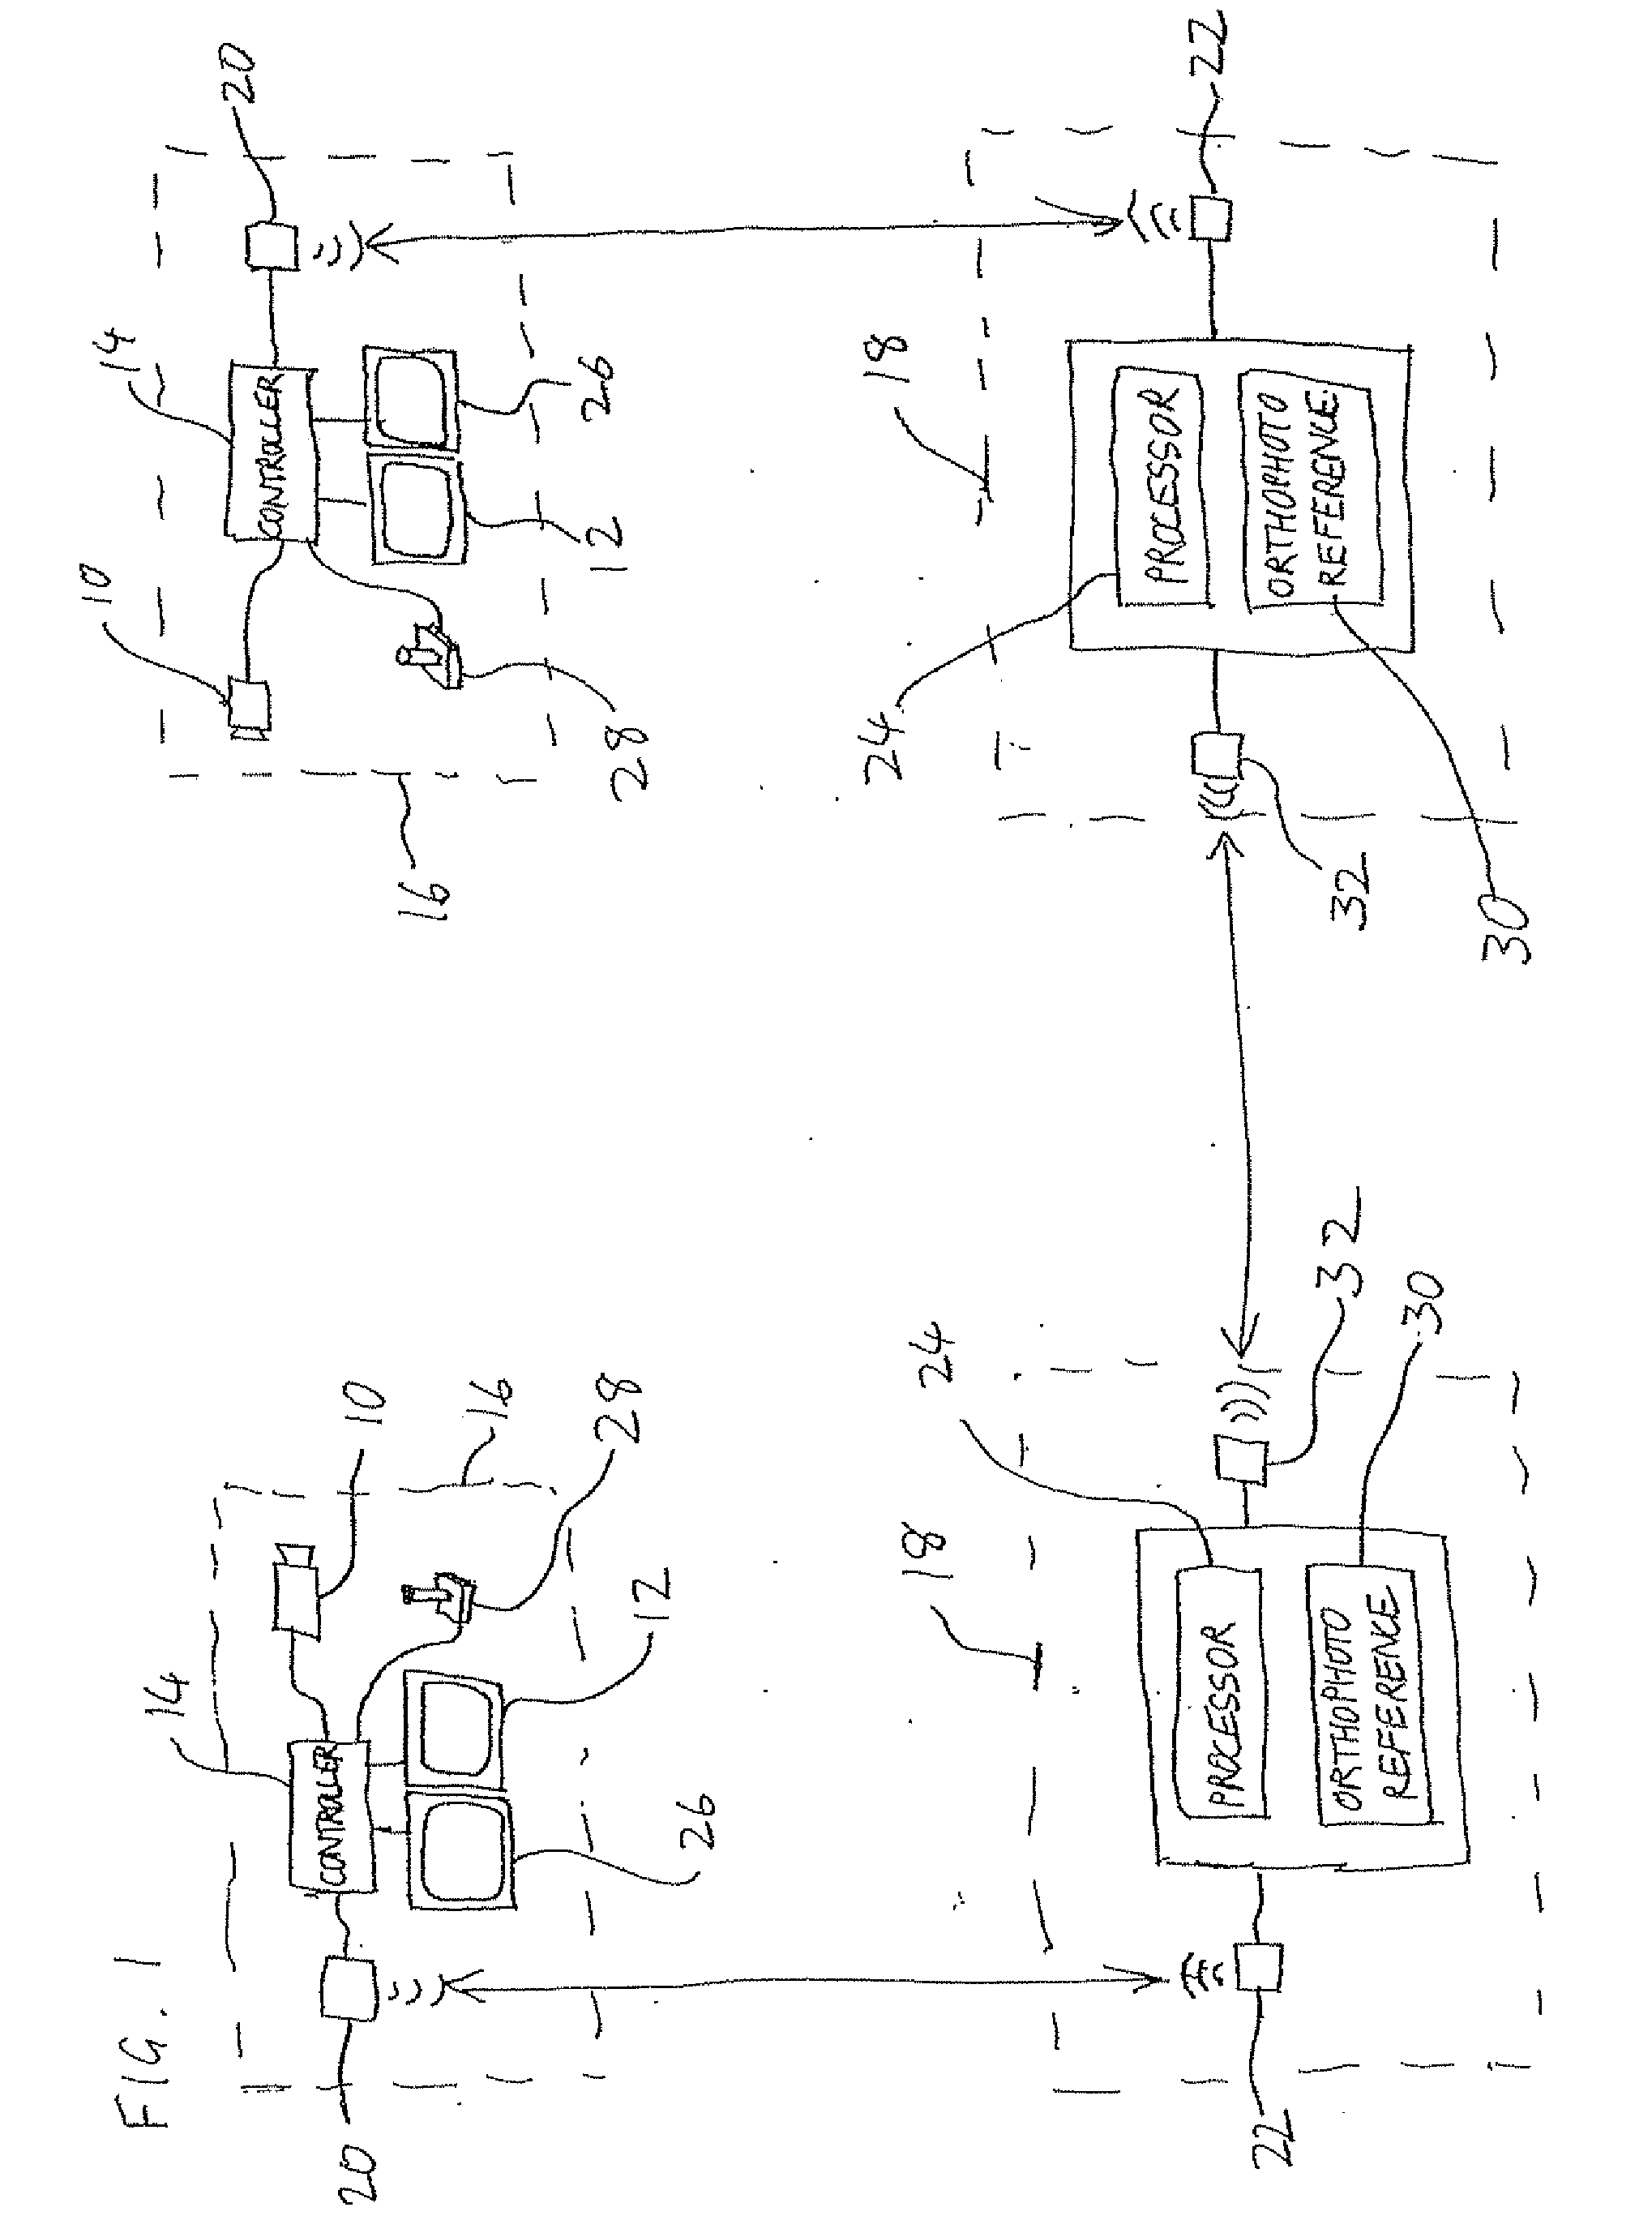 Methods and system for communication and displaying points-of-interest